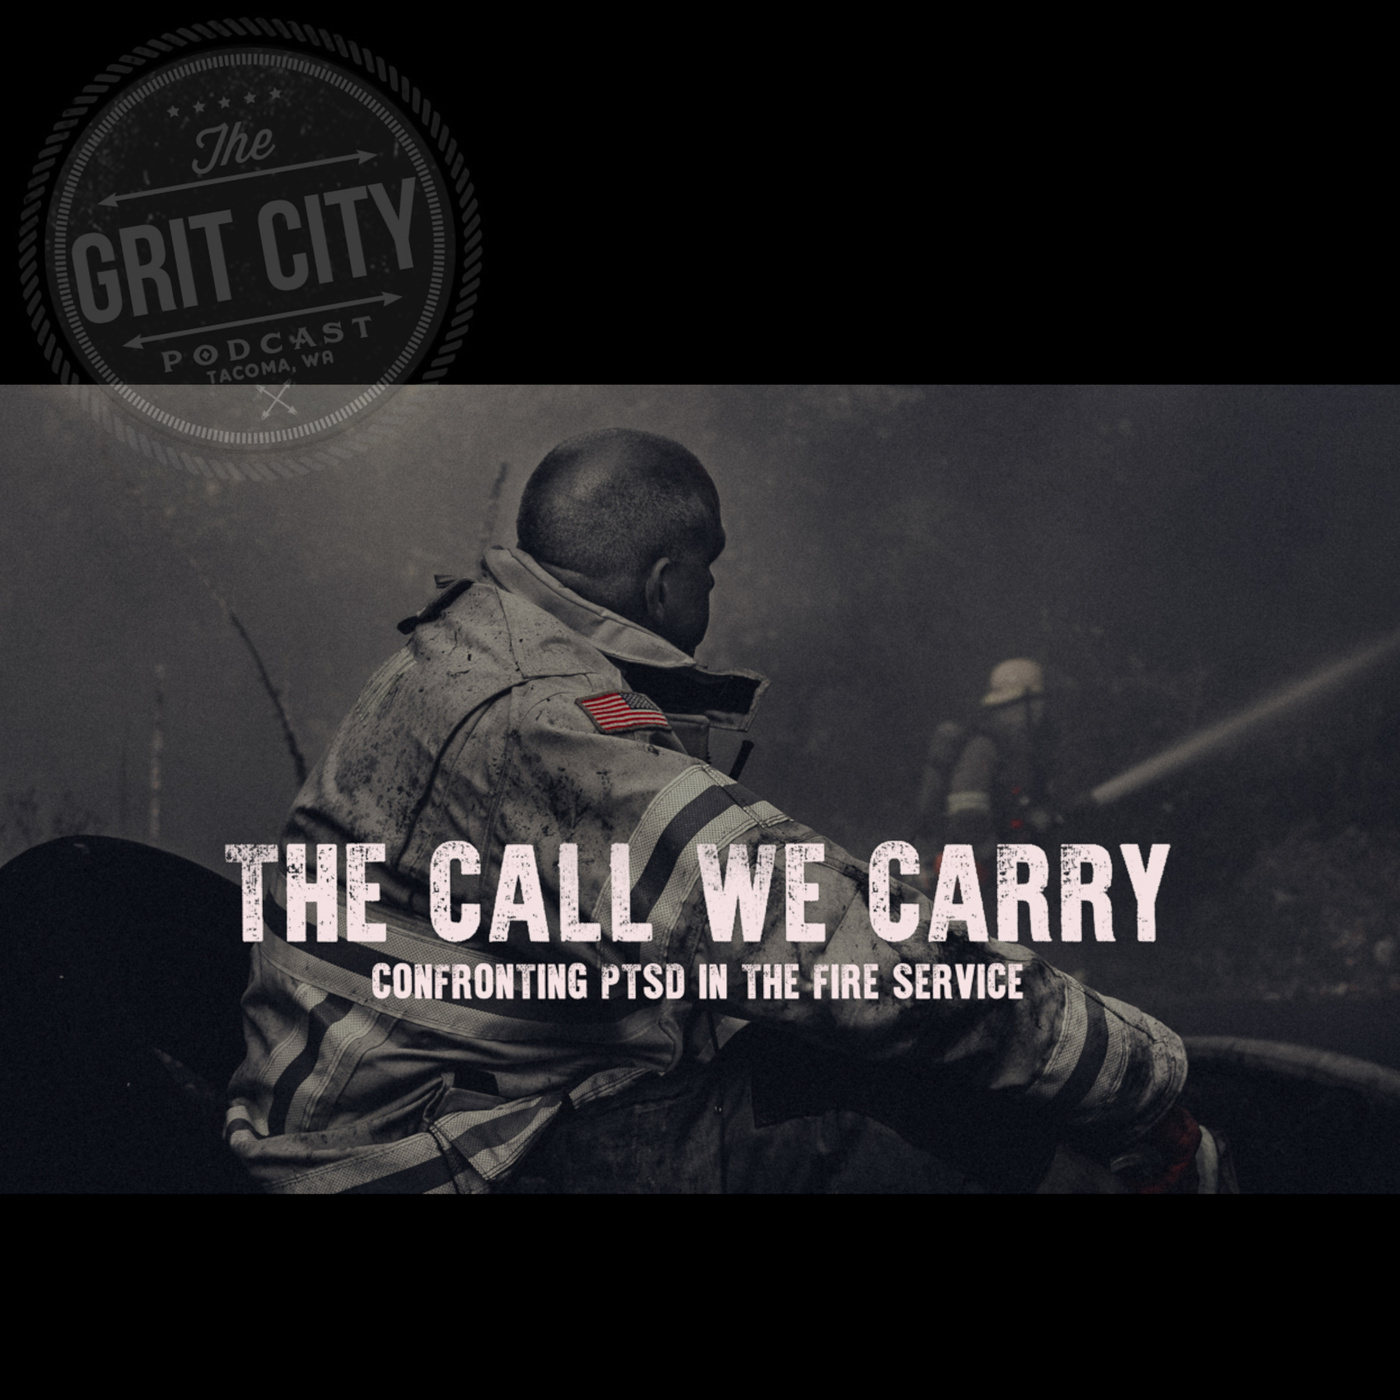 The Grit City Podcast: GCP: The Call We Carry - Tacoma Fire Department